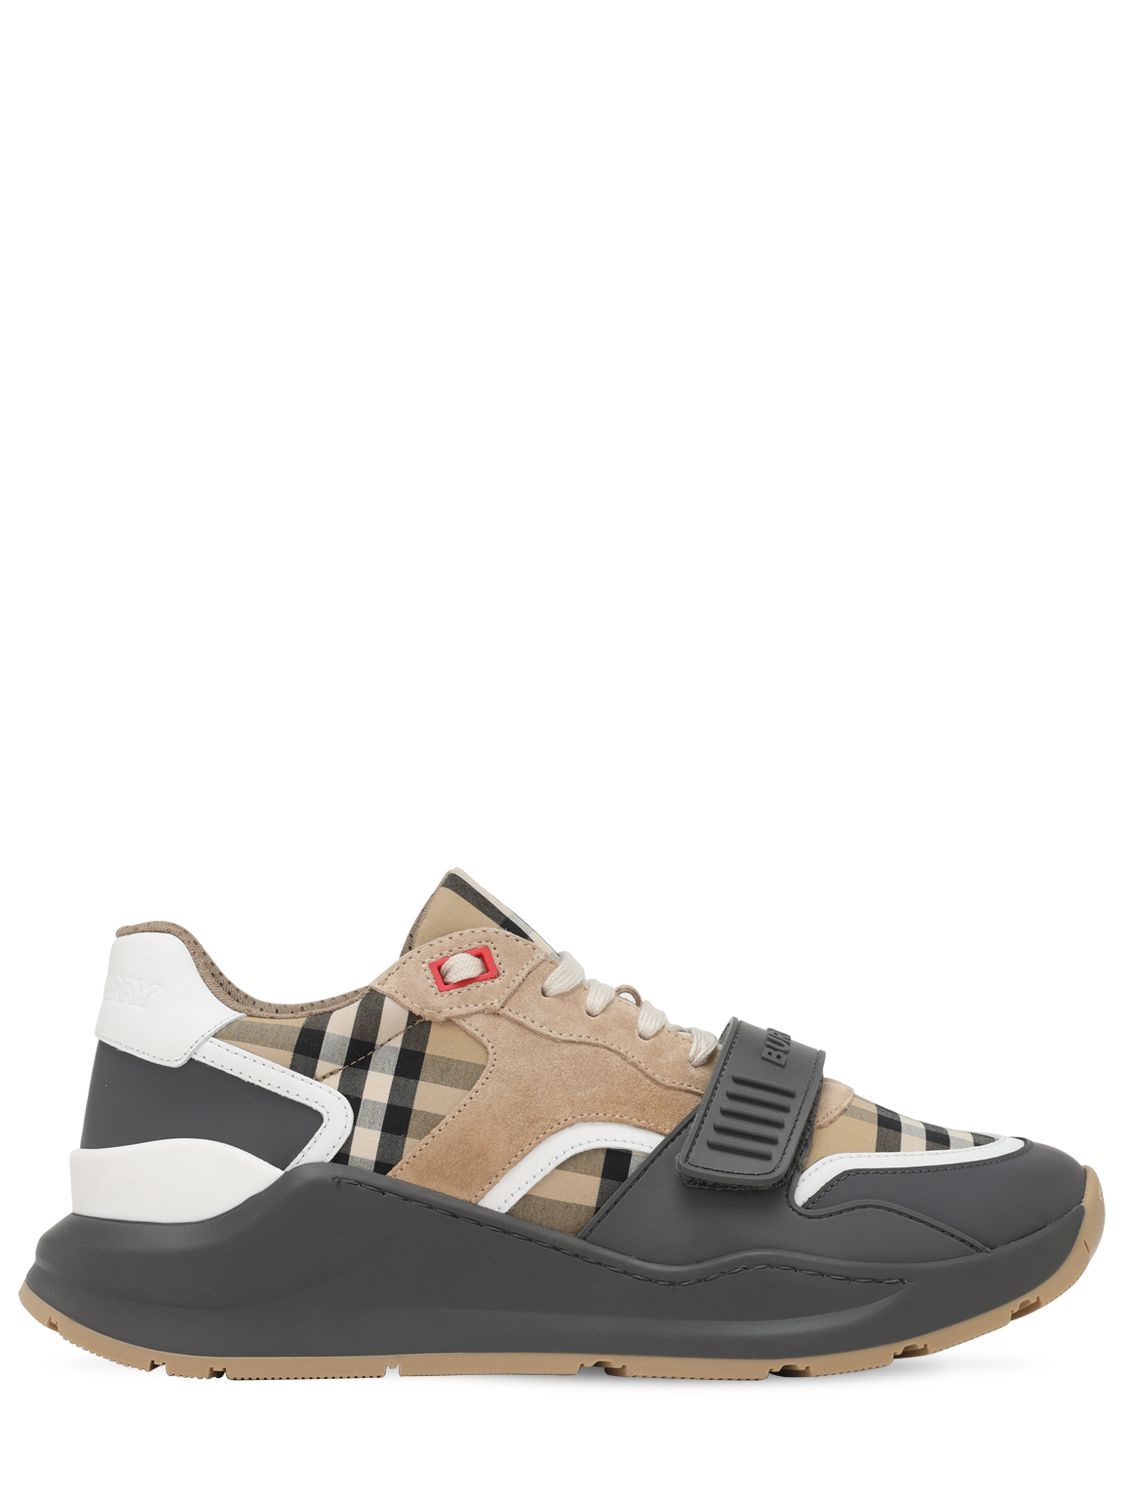 BURBERRY 30mm Ramsey Check & Leather Sneakers